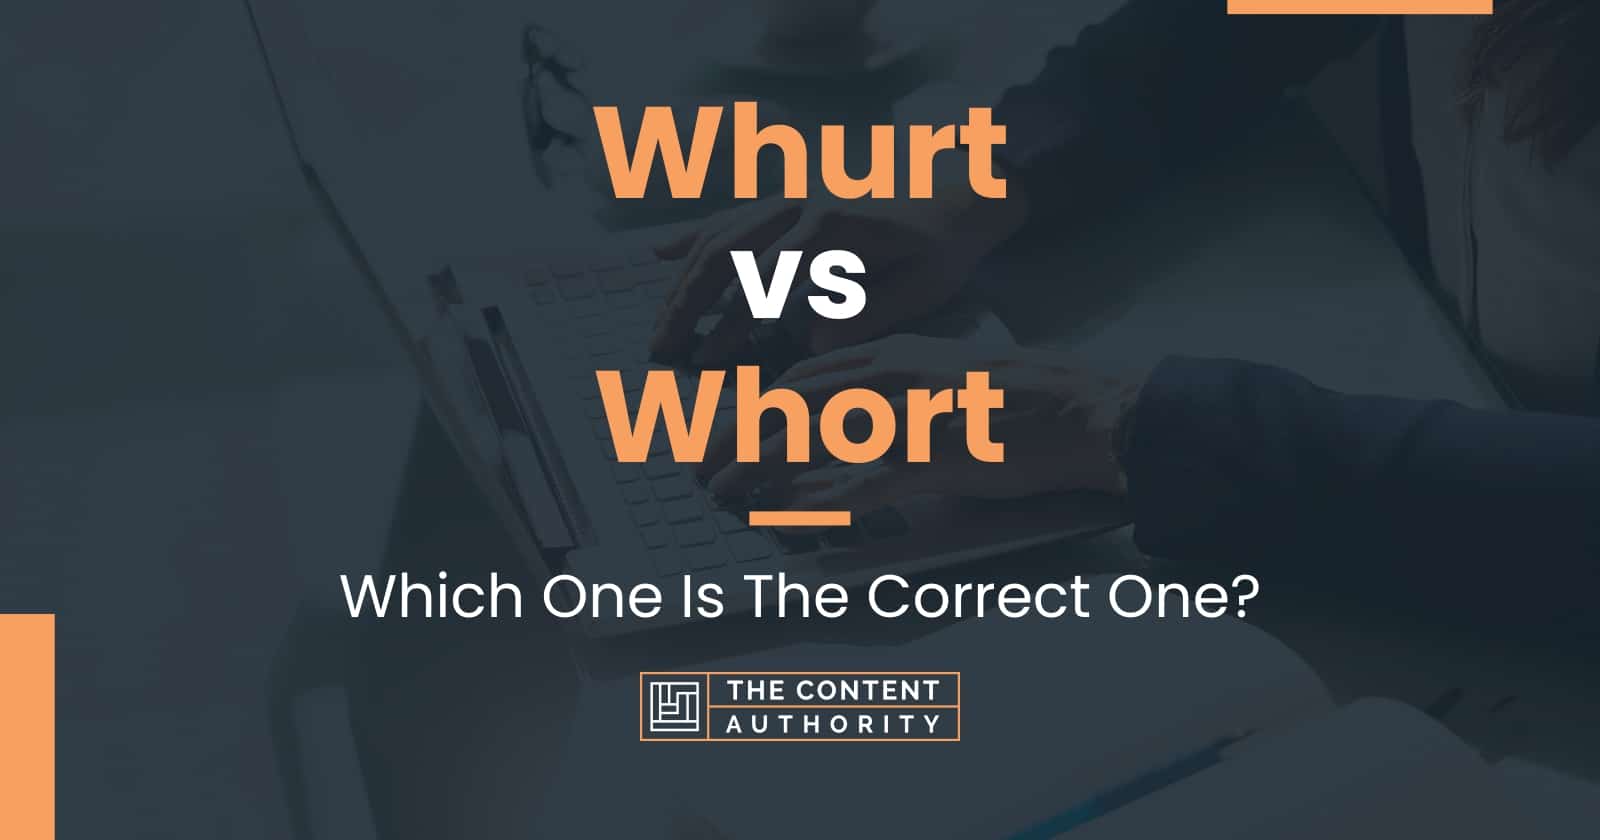 whurt-vs-whort-which-one-is-the-correct-one